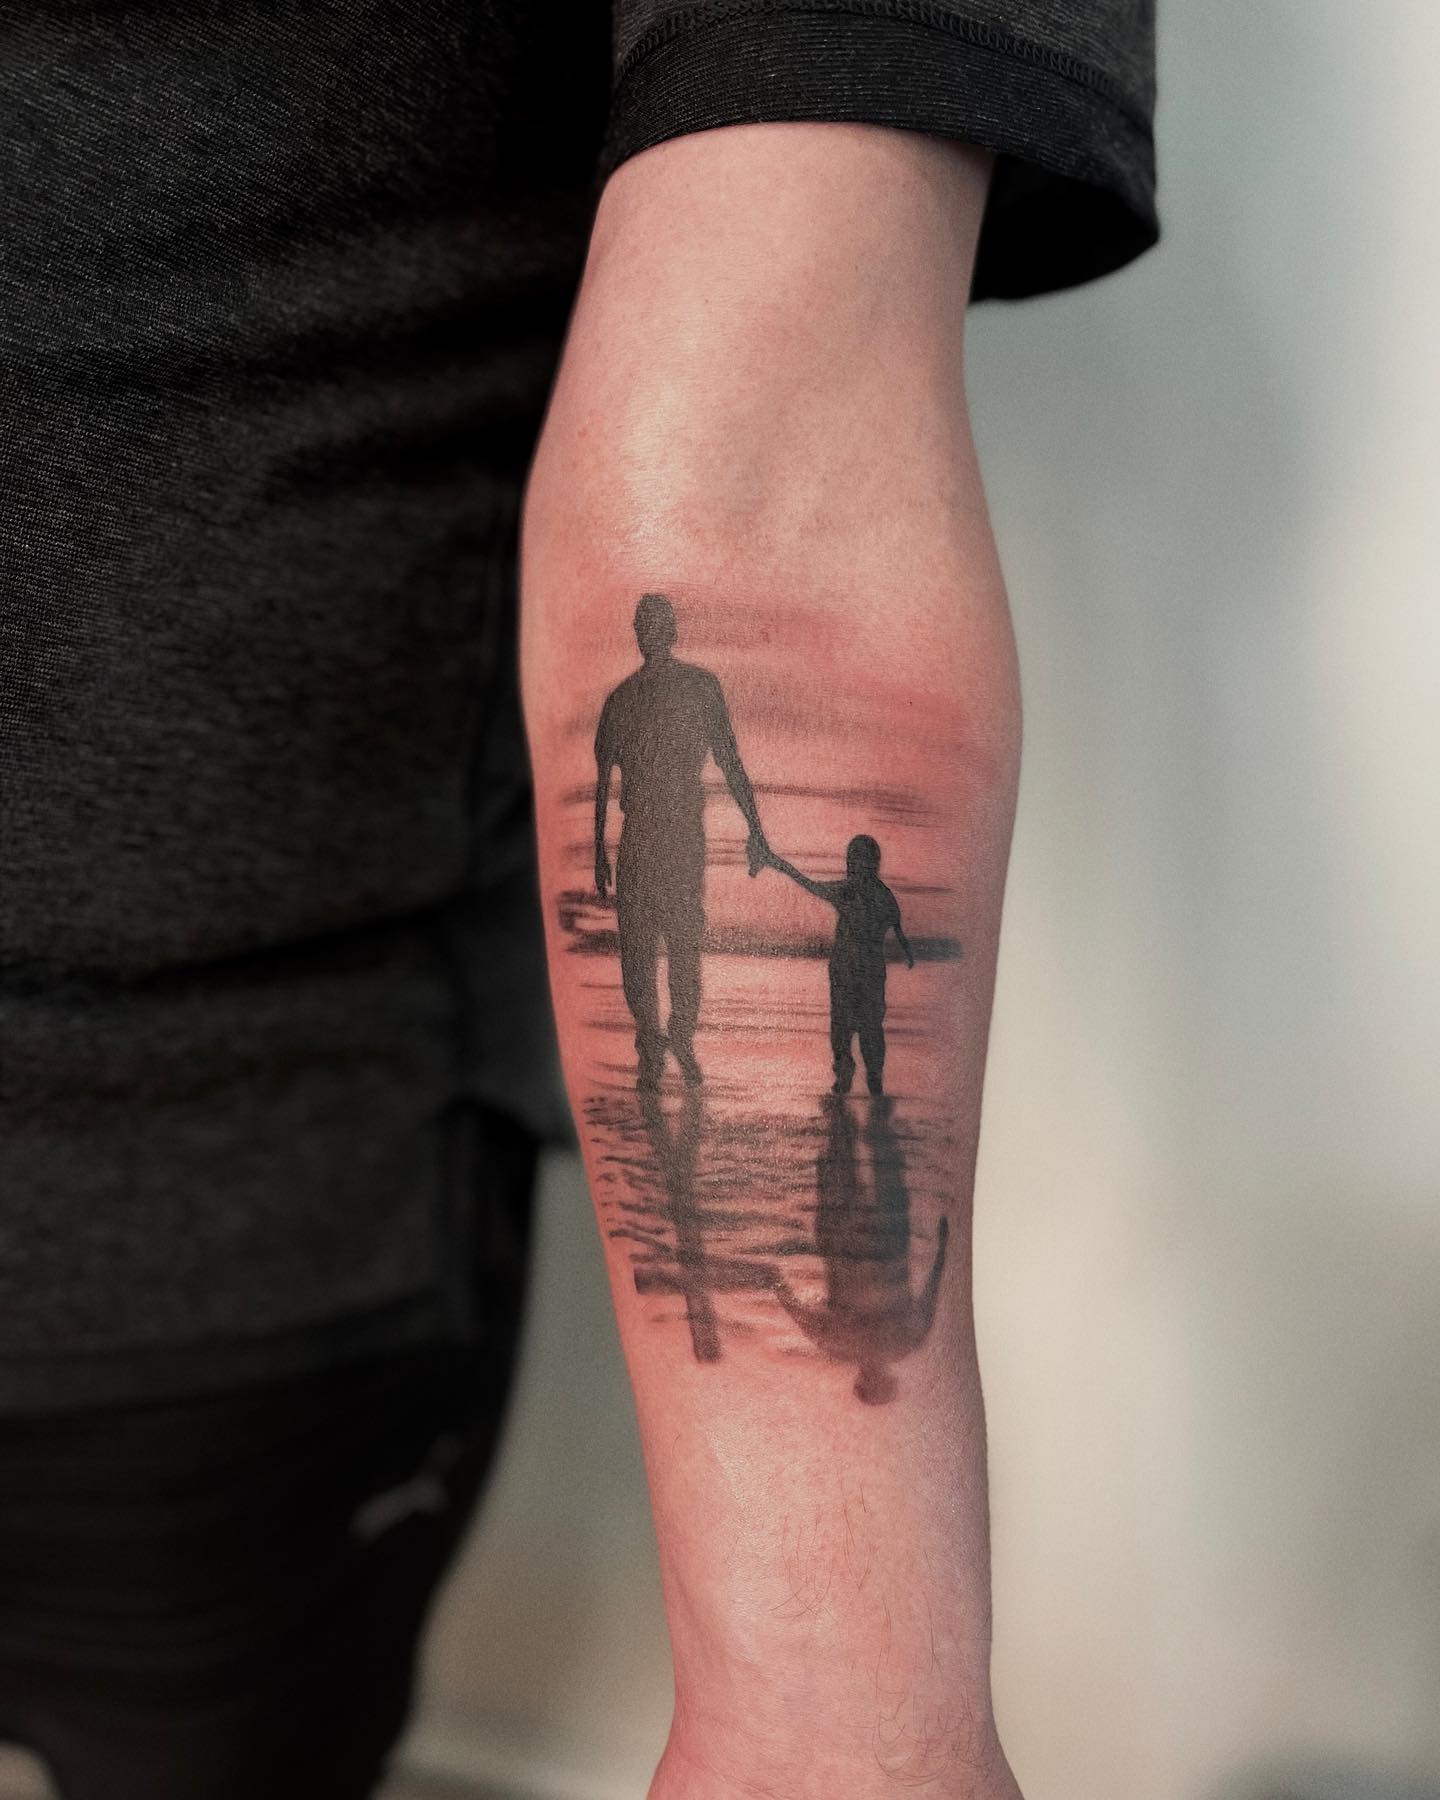 Dad spends 30 hours getting a tattoo that matches his sons birthmark